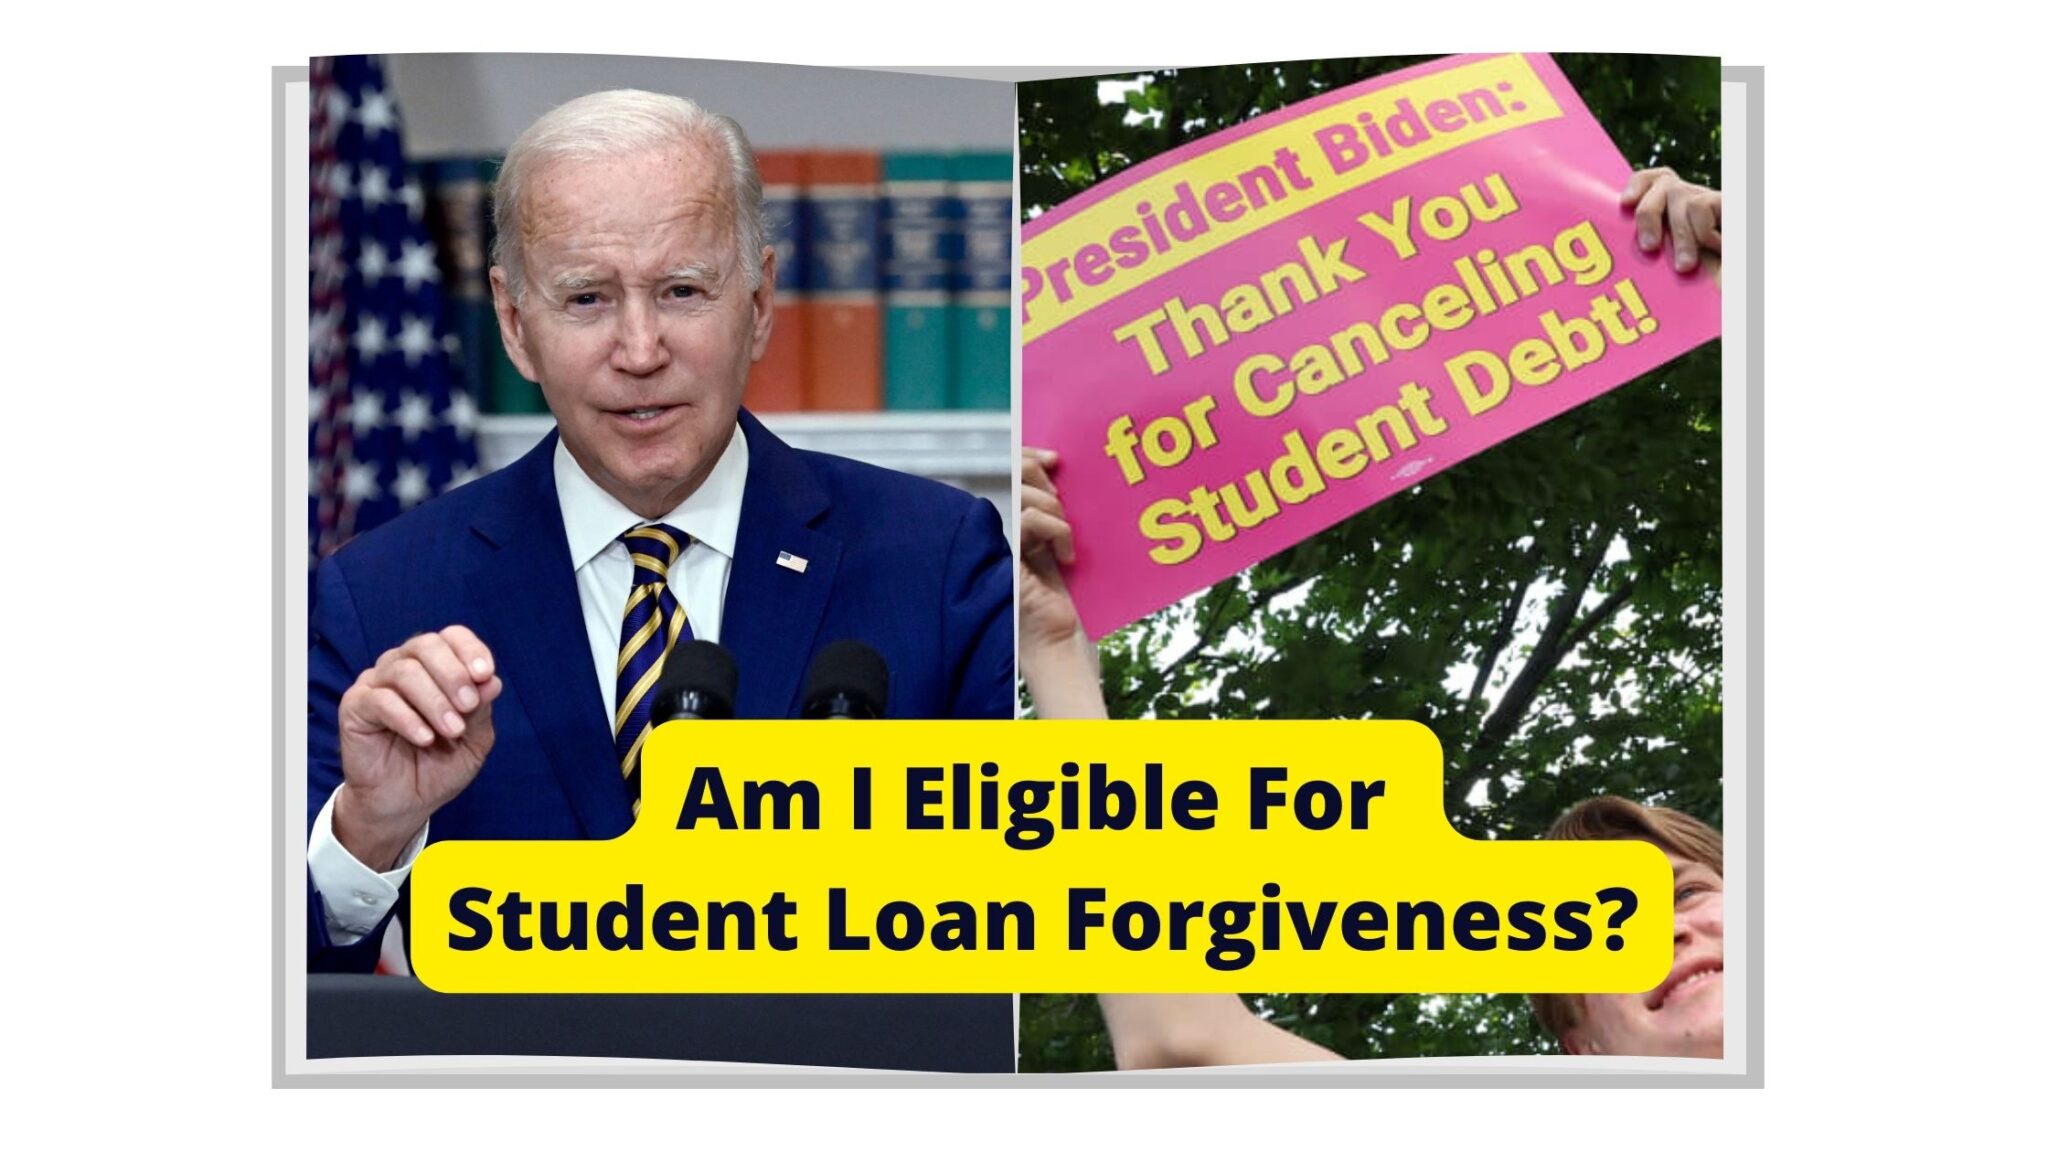 fact-sheet-am-i-eligible-for-student-loan-forgiveness-times-md